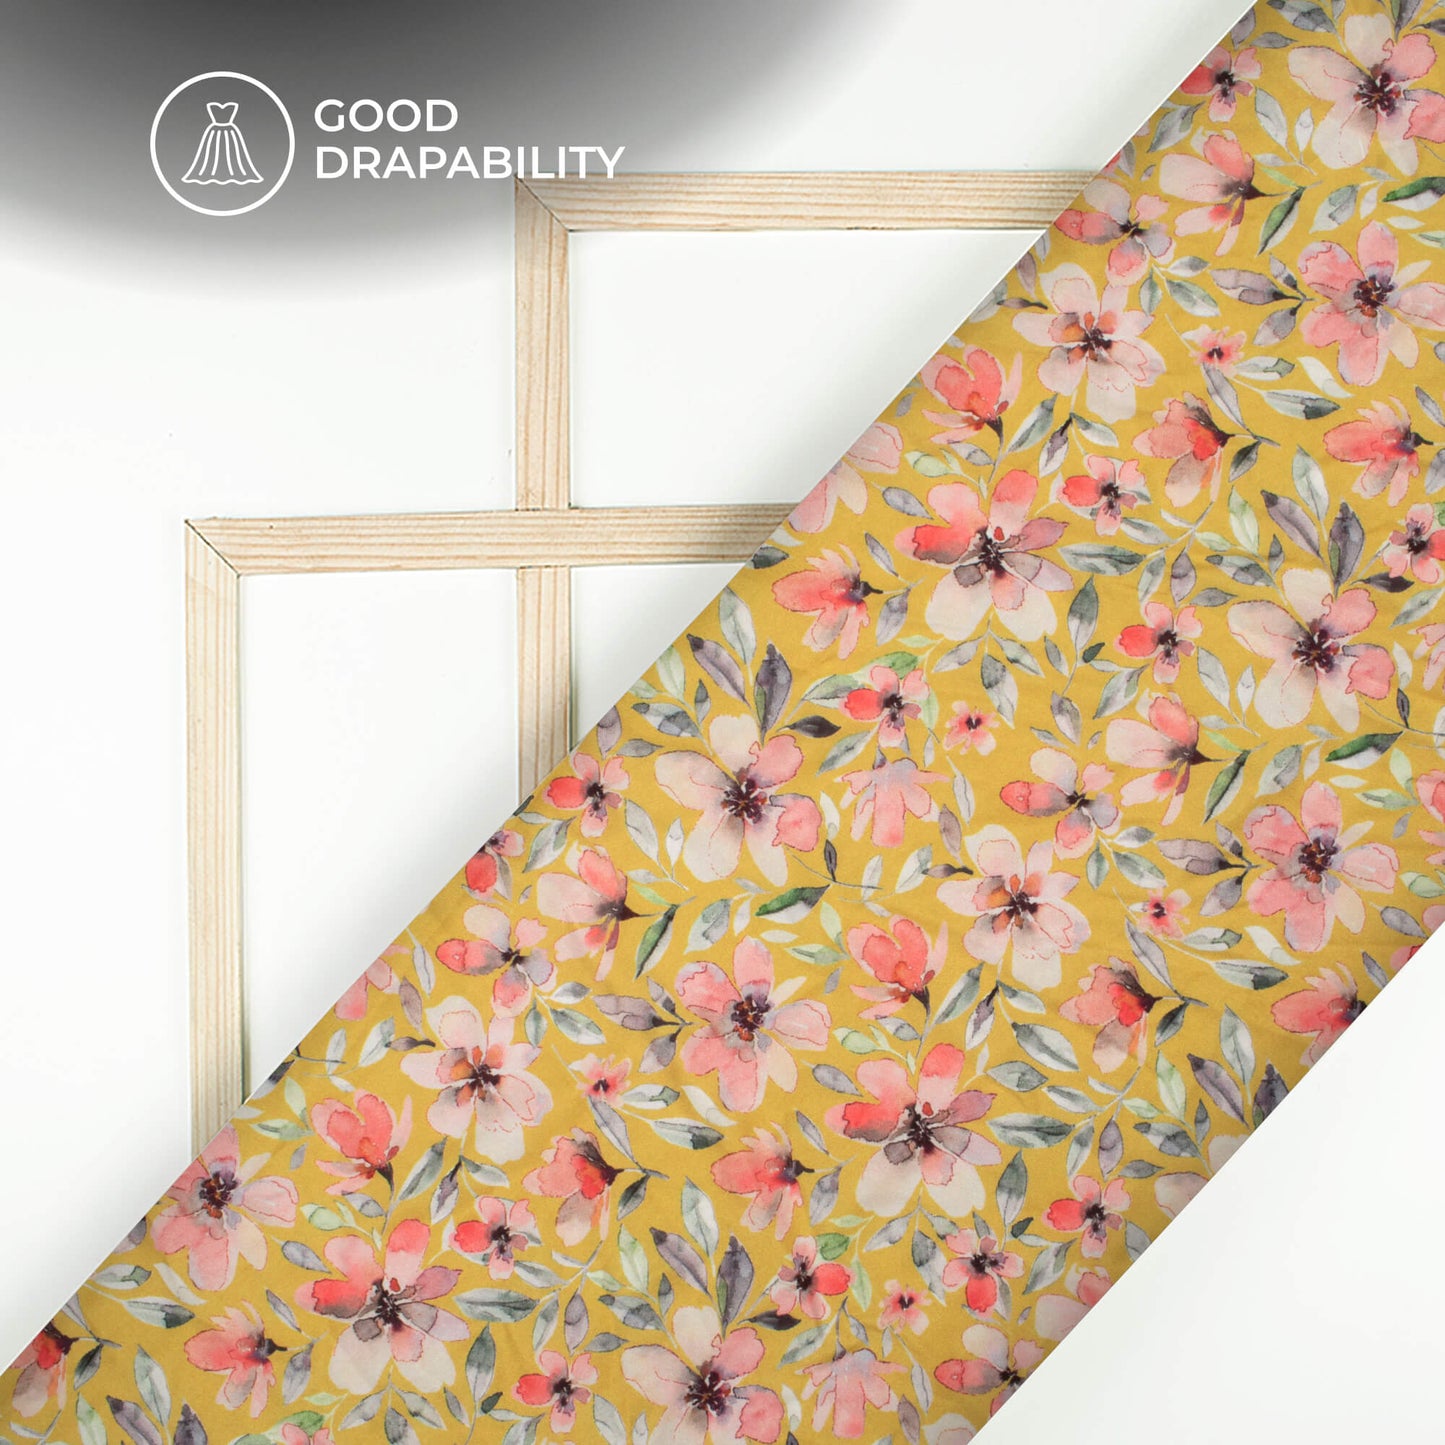 Blushing Floral Digital Print Butter Crepe Fabric